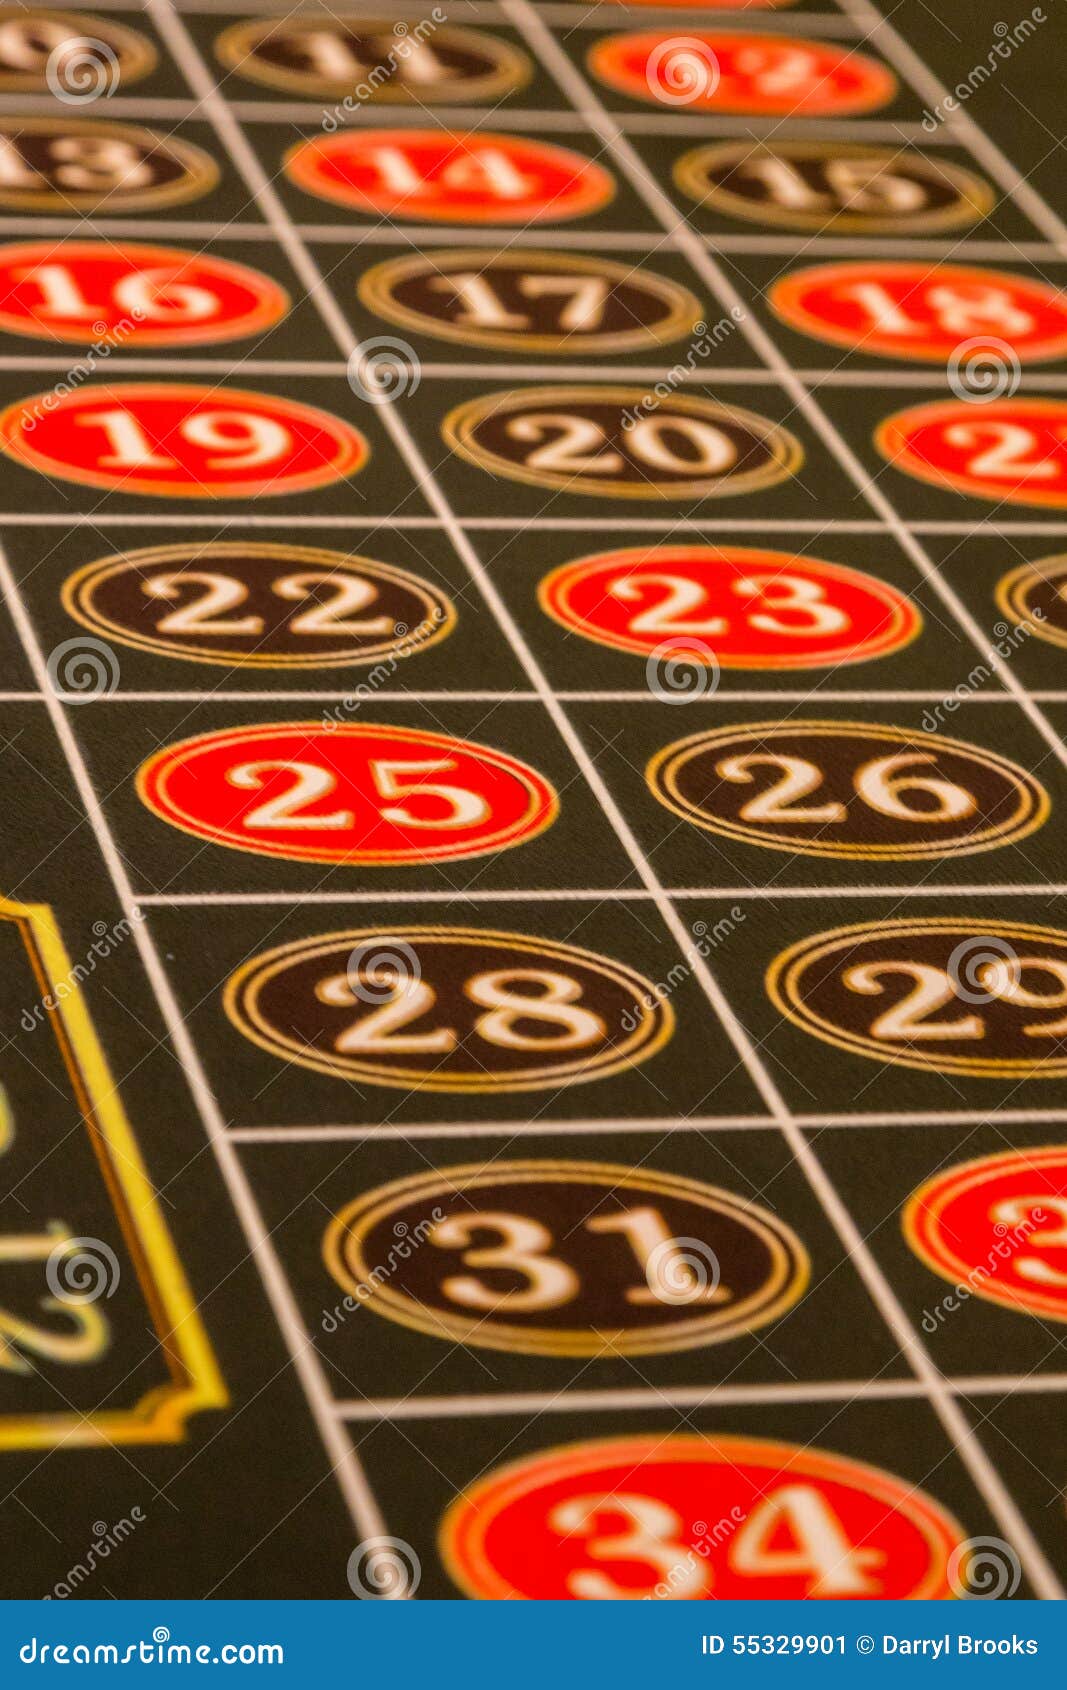 Numbers on Roulette Table stock image. Image of betting - 55329901